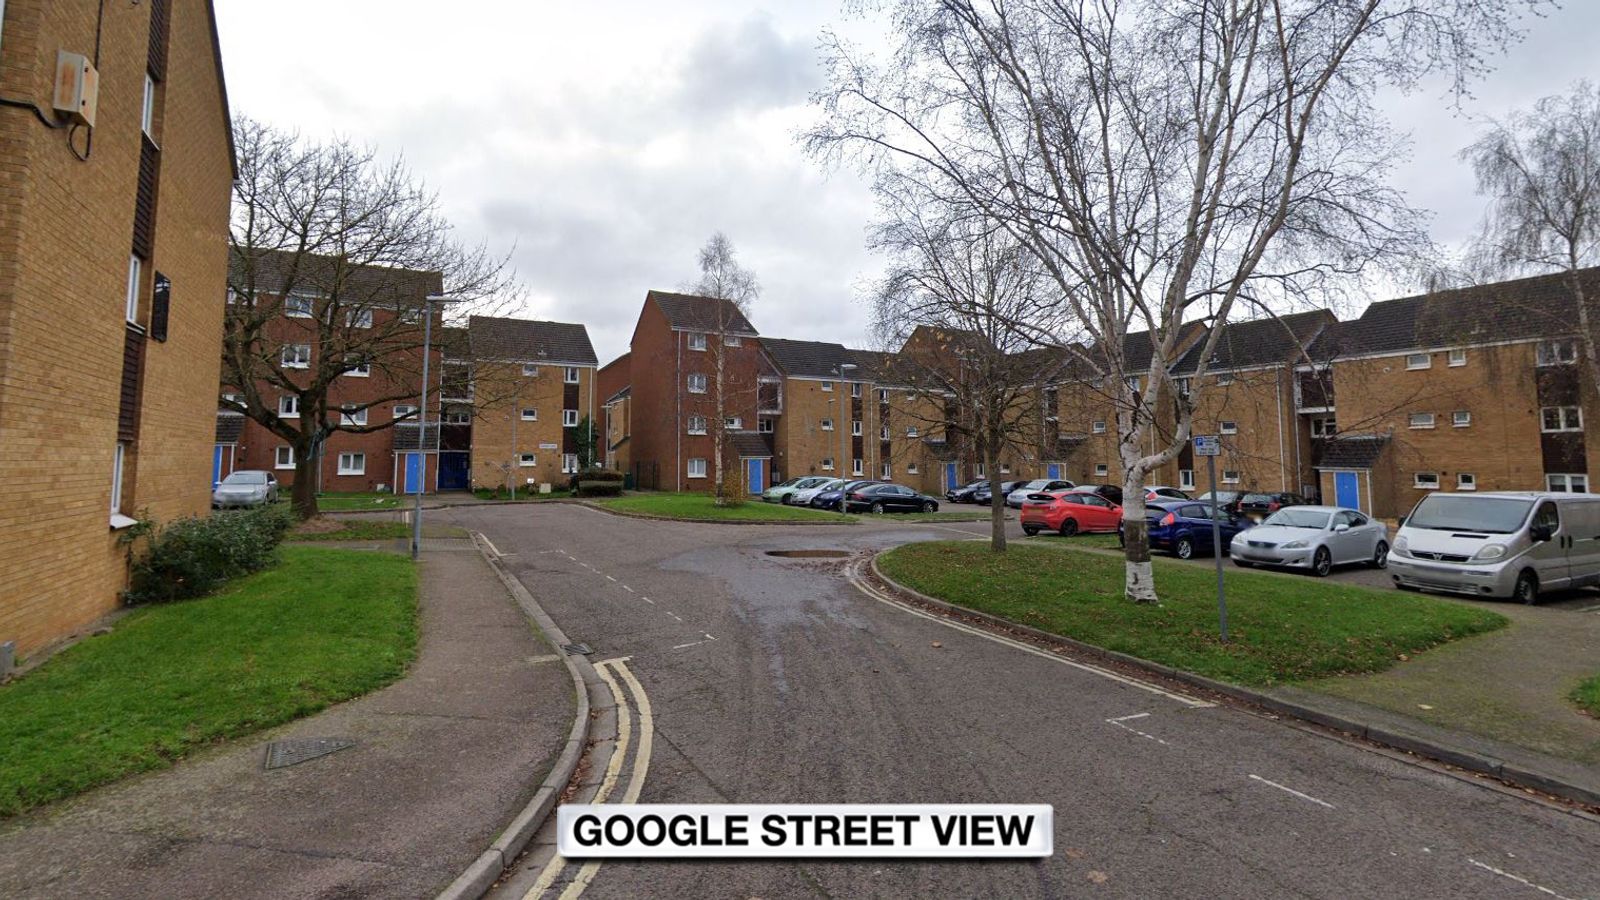 Murder investigation launched after body of 36-year-old woman found in Northampton